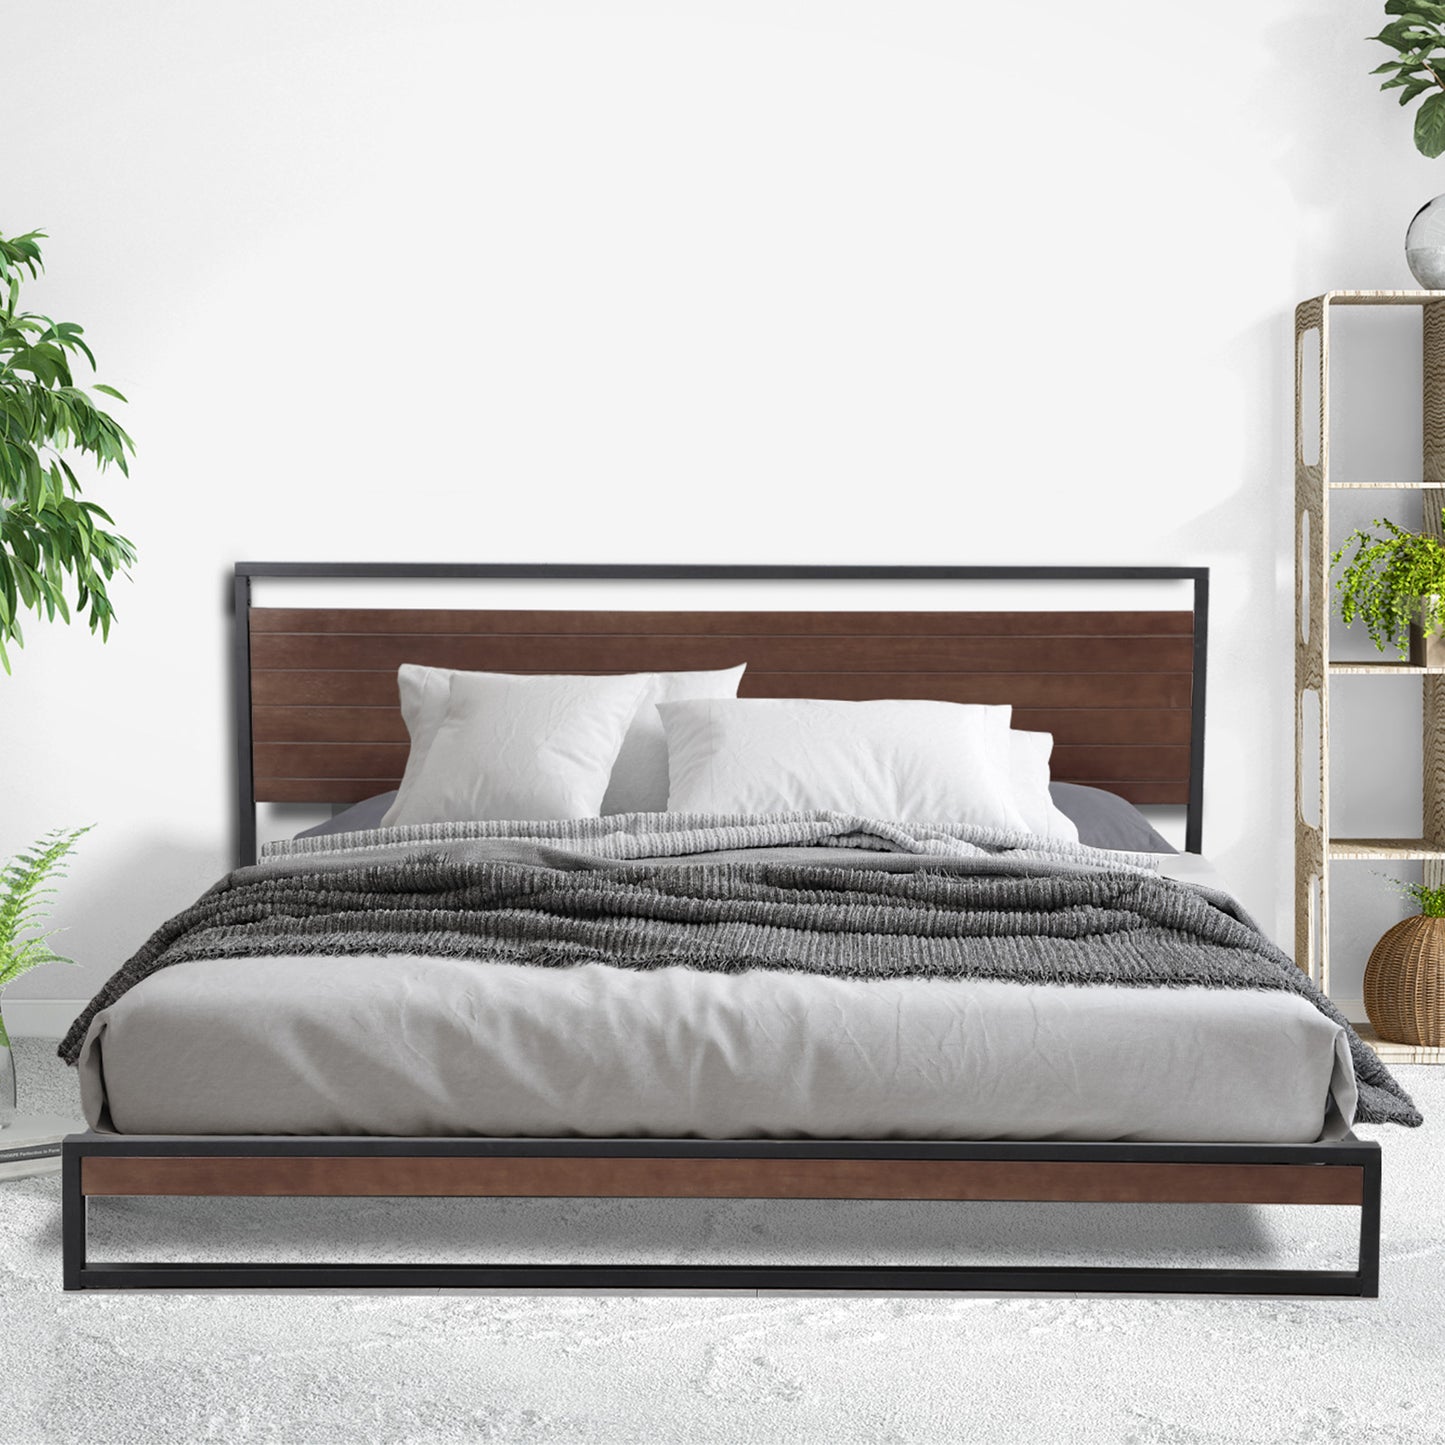 Xylia Bed Frame With Headboard - Black King